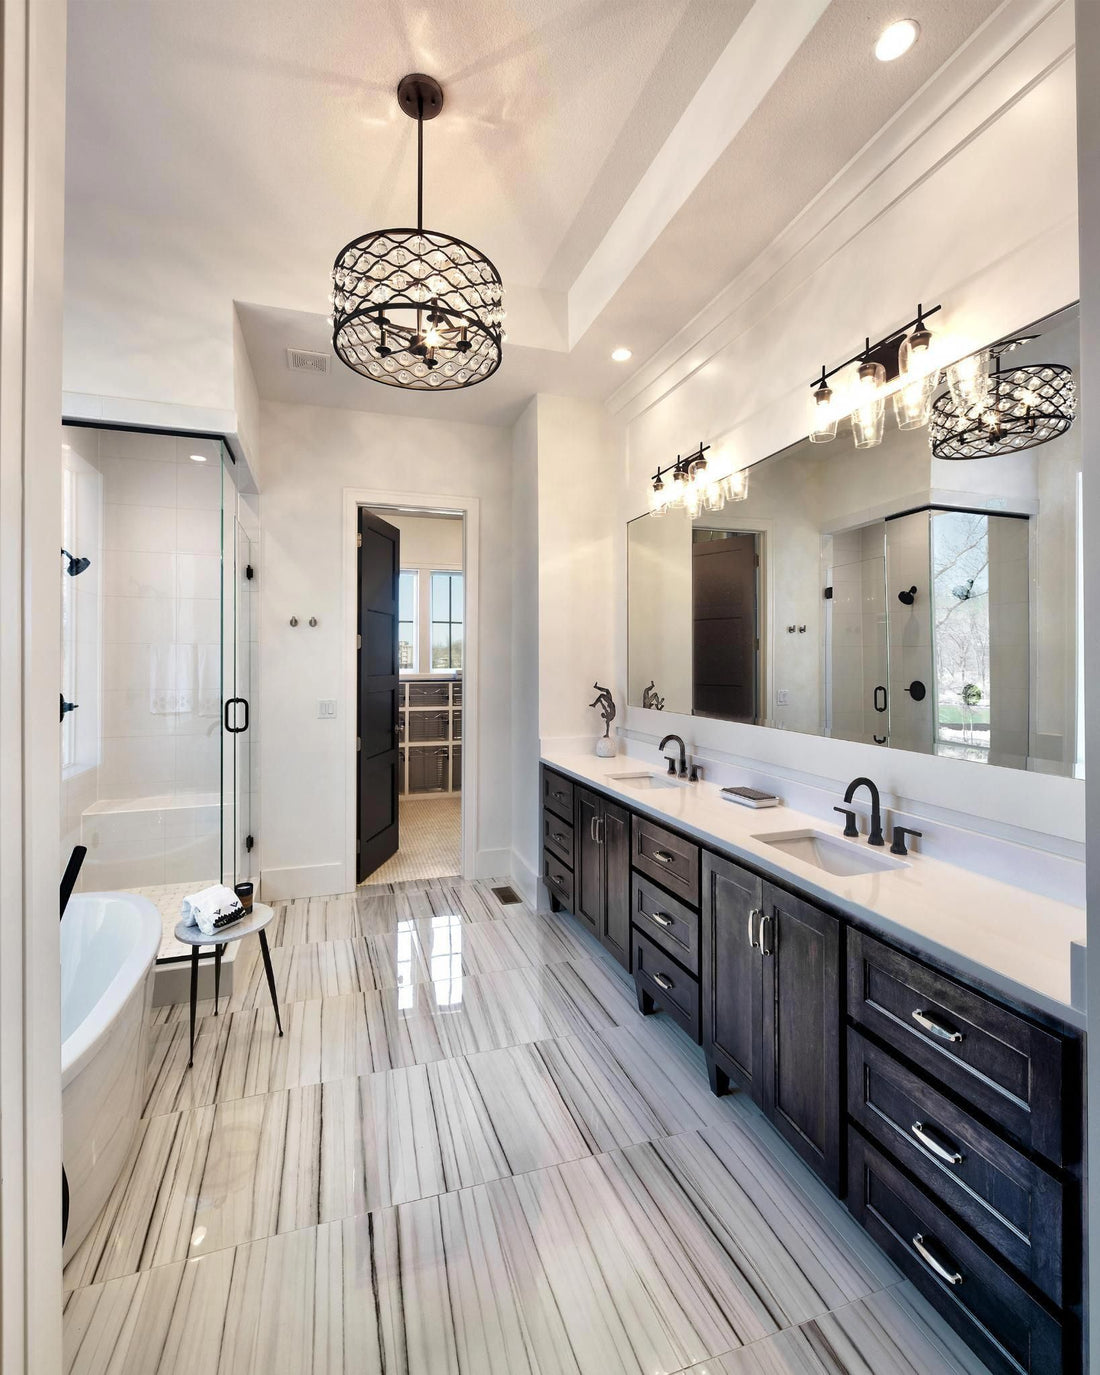 Tips for Budgeted Remodeling of Your Bathroom